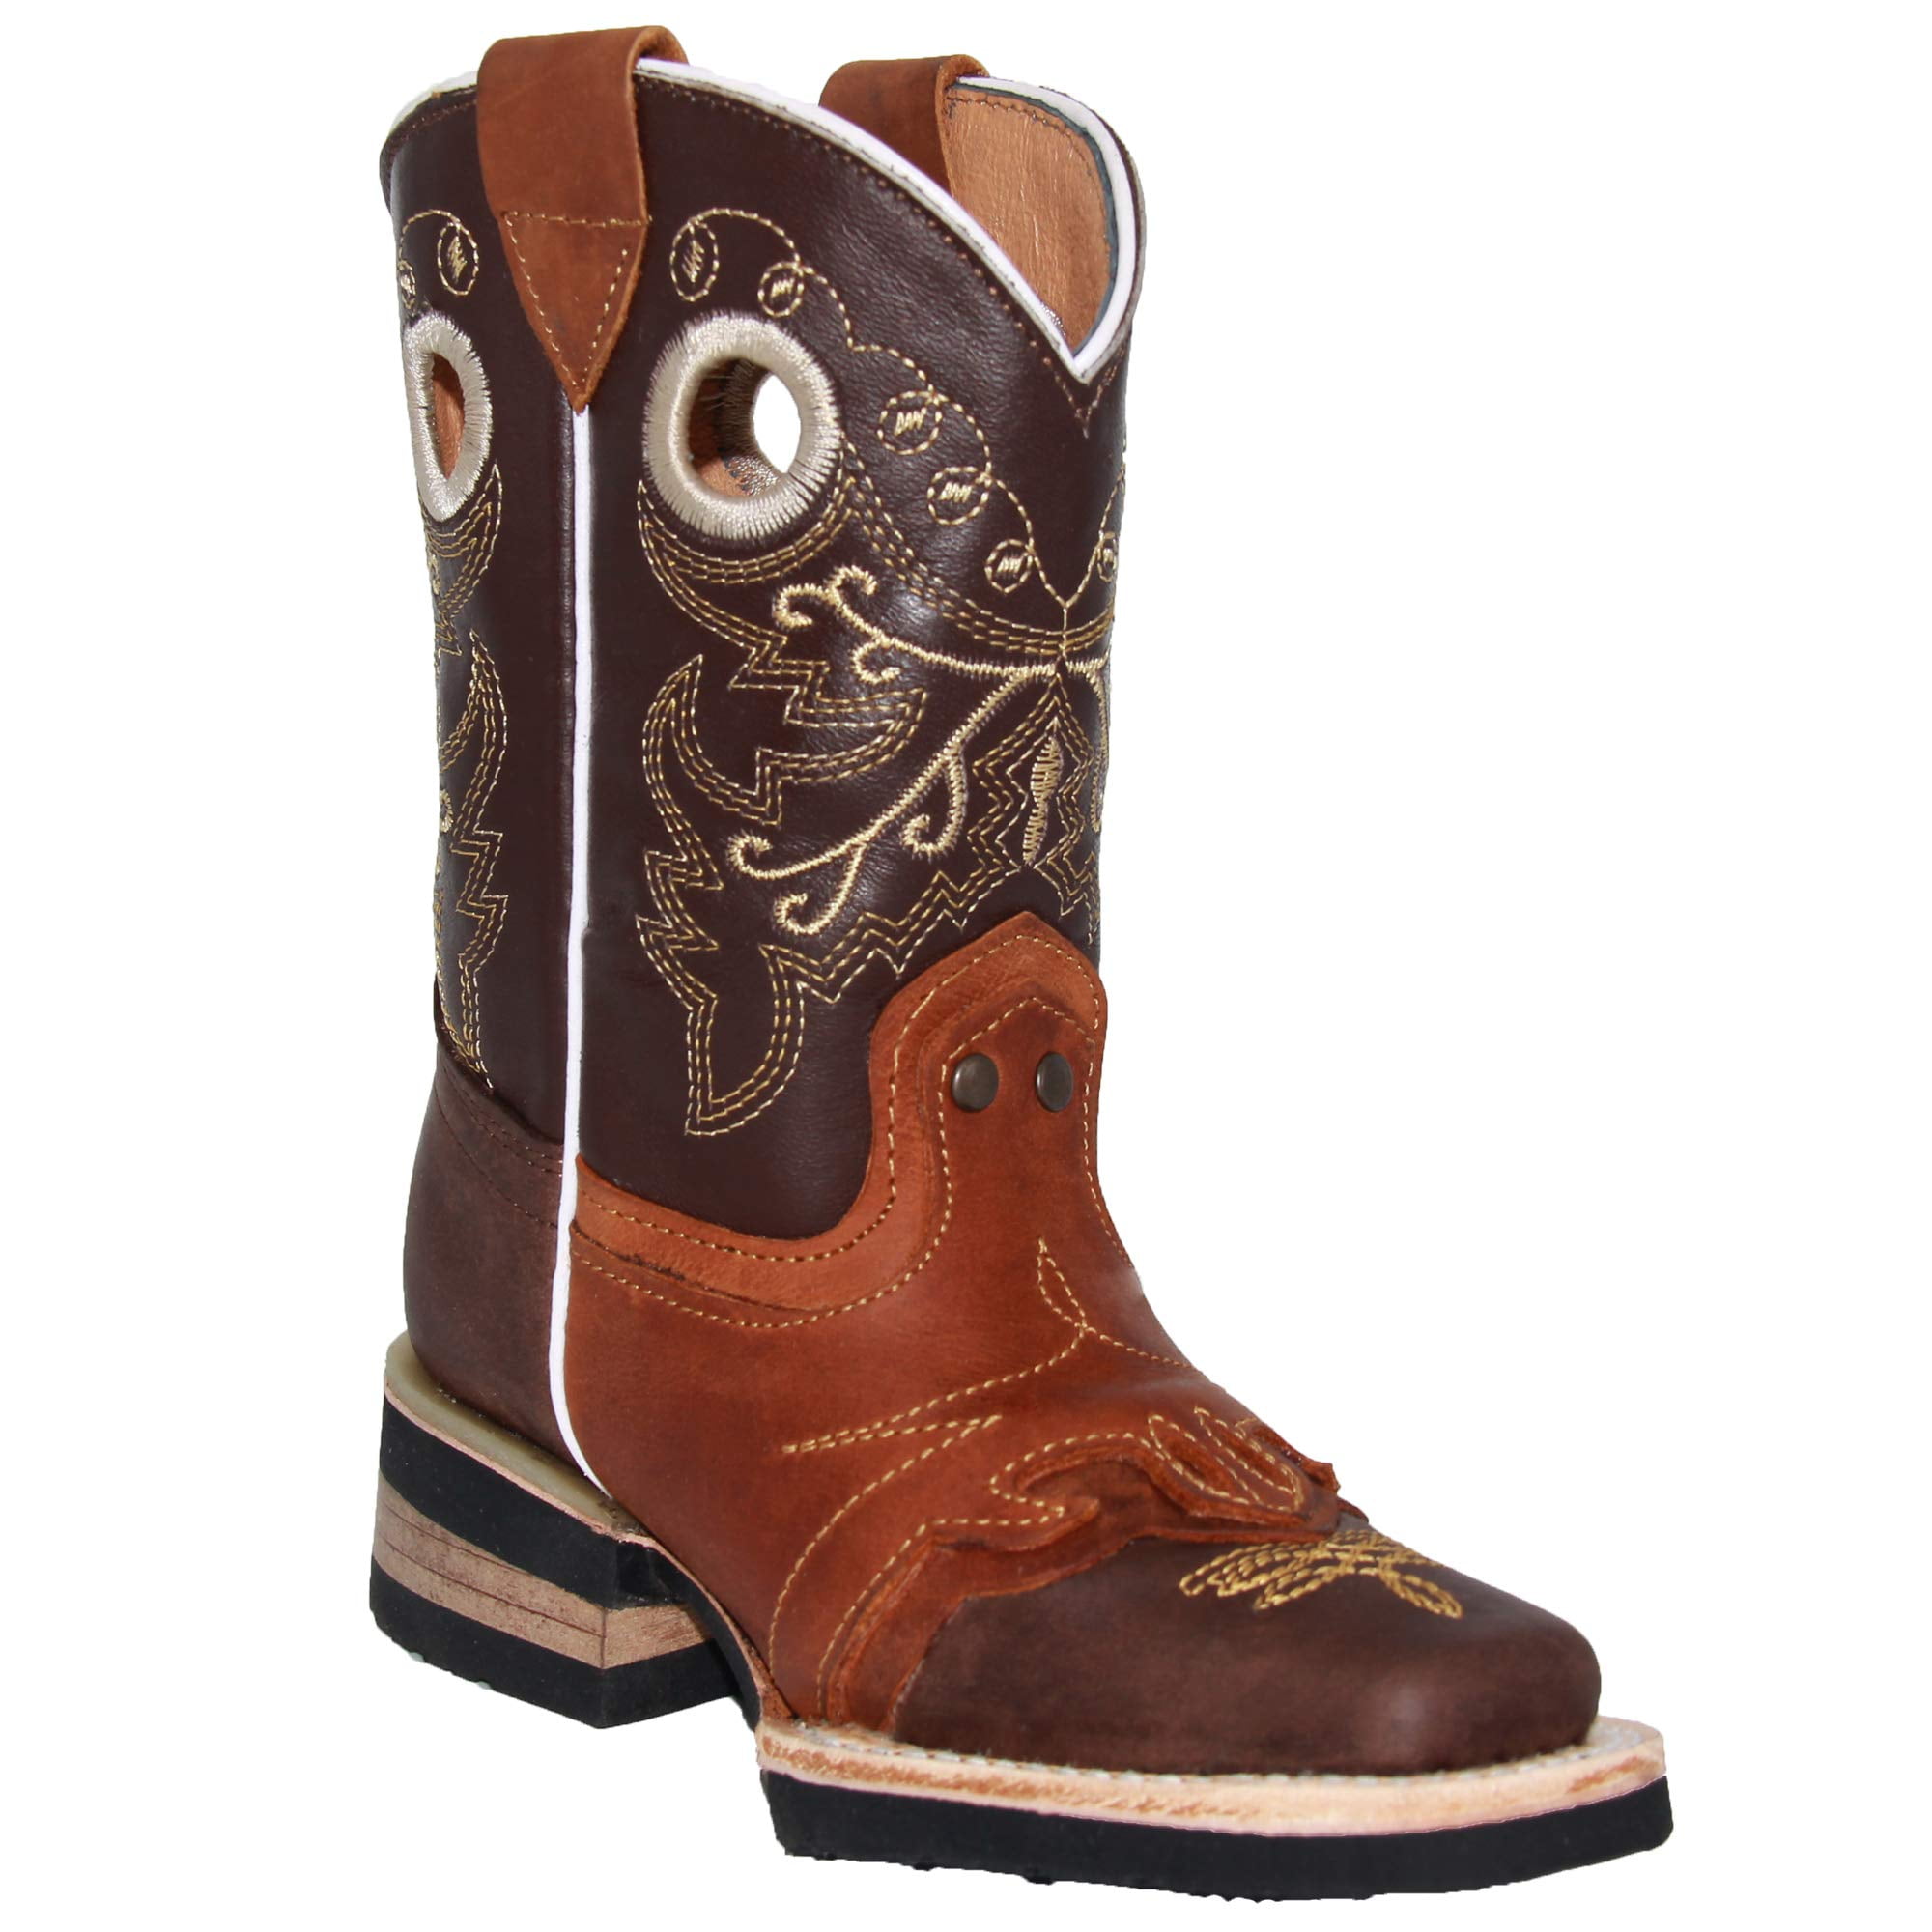 Toddler Size Genuine Leather Cowboy Western Side Zipper Closure Boots 